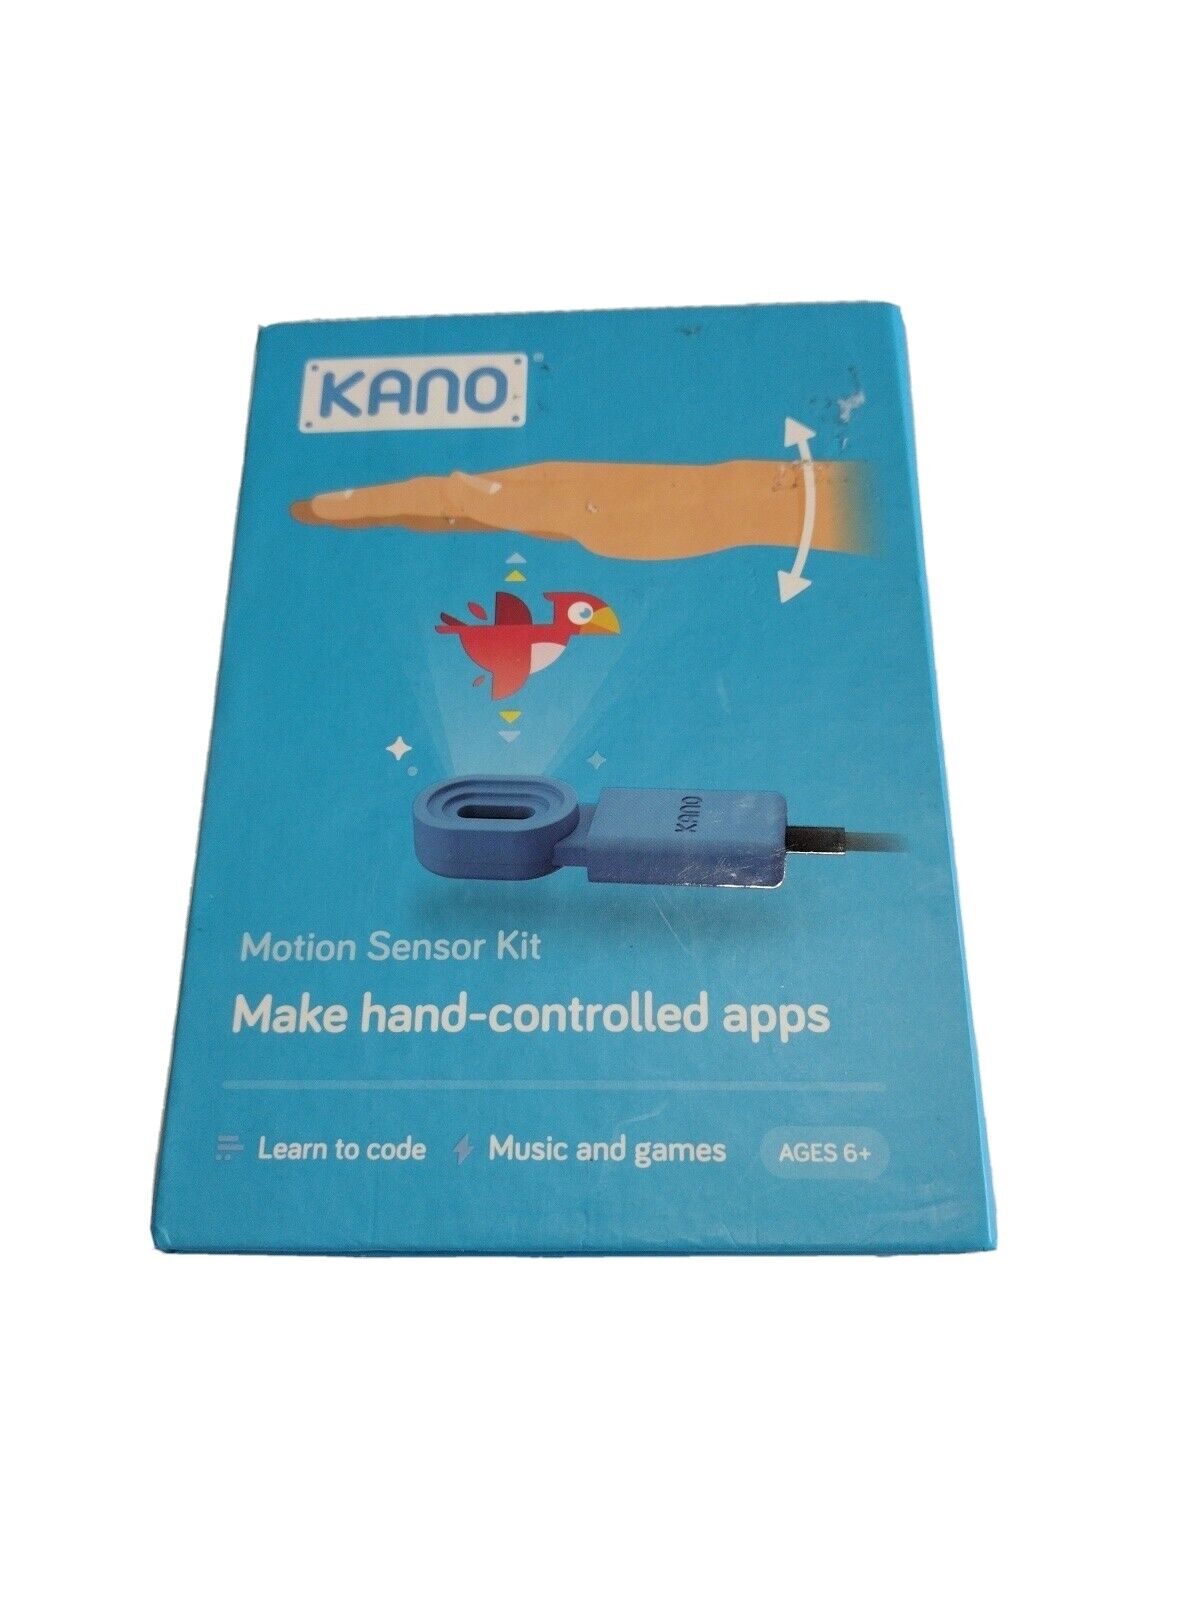 Kano Motion Sensor Kit – Learn to code with Motion *New